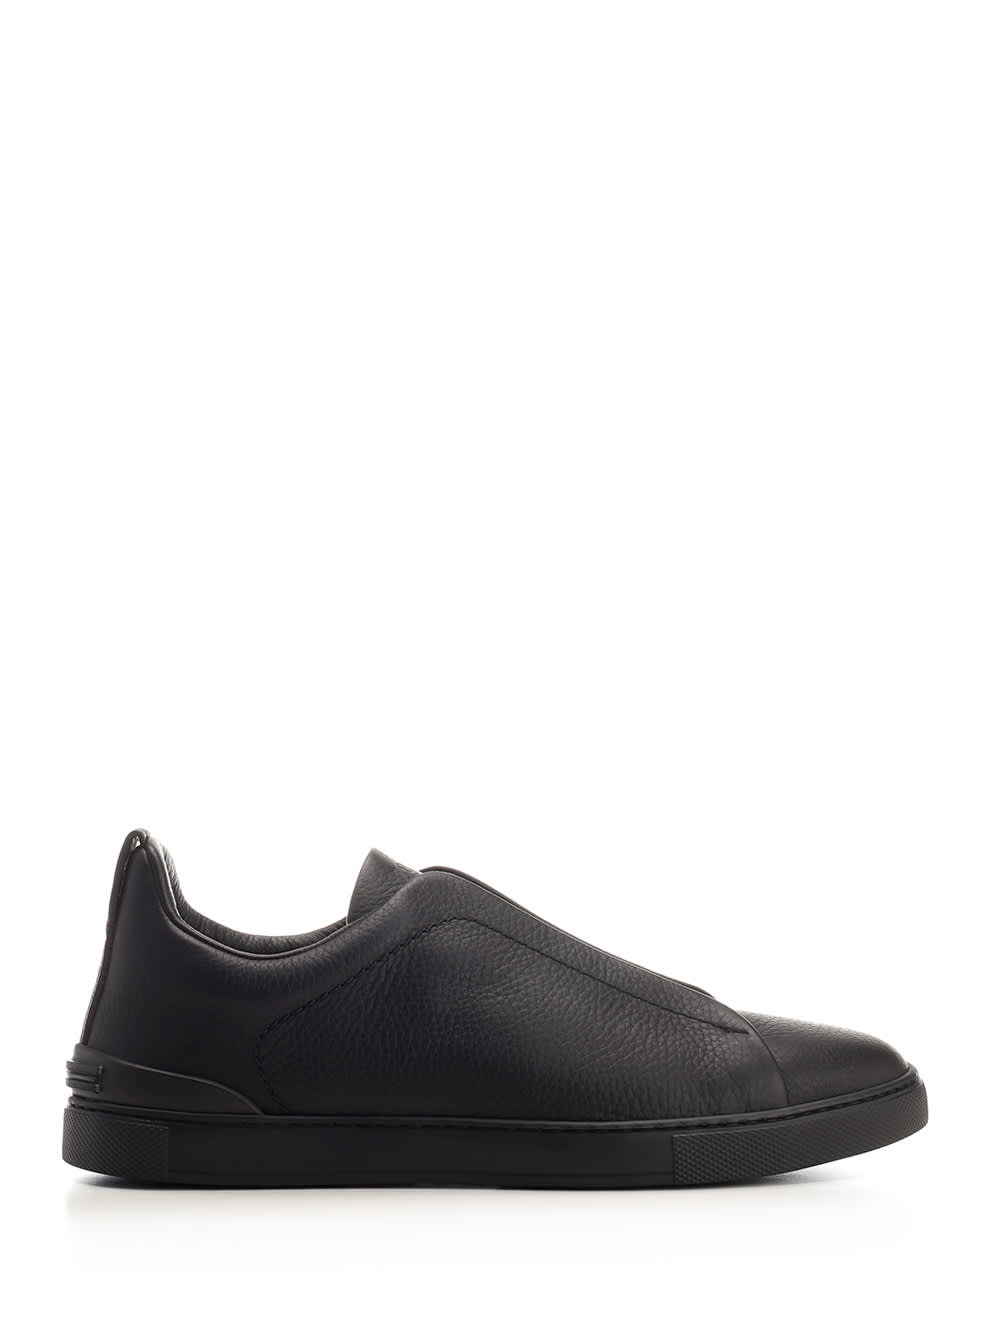 ZEGNA LOW TOP TRIPLE STITCH SNEAKERS